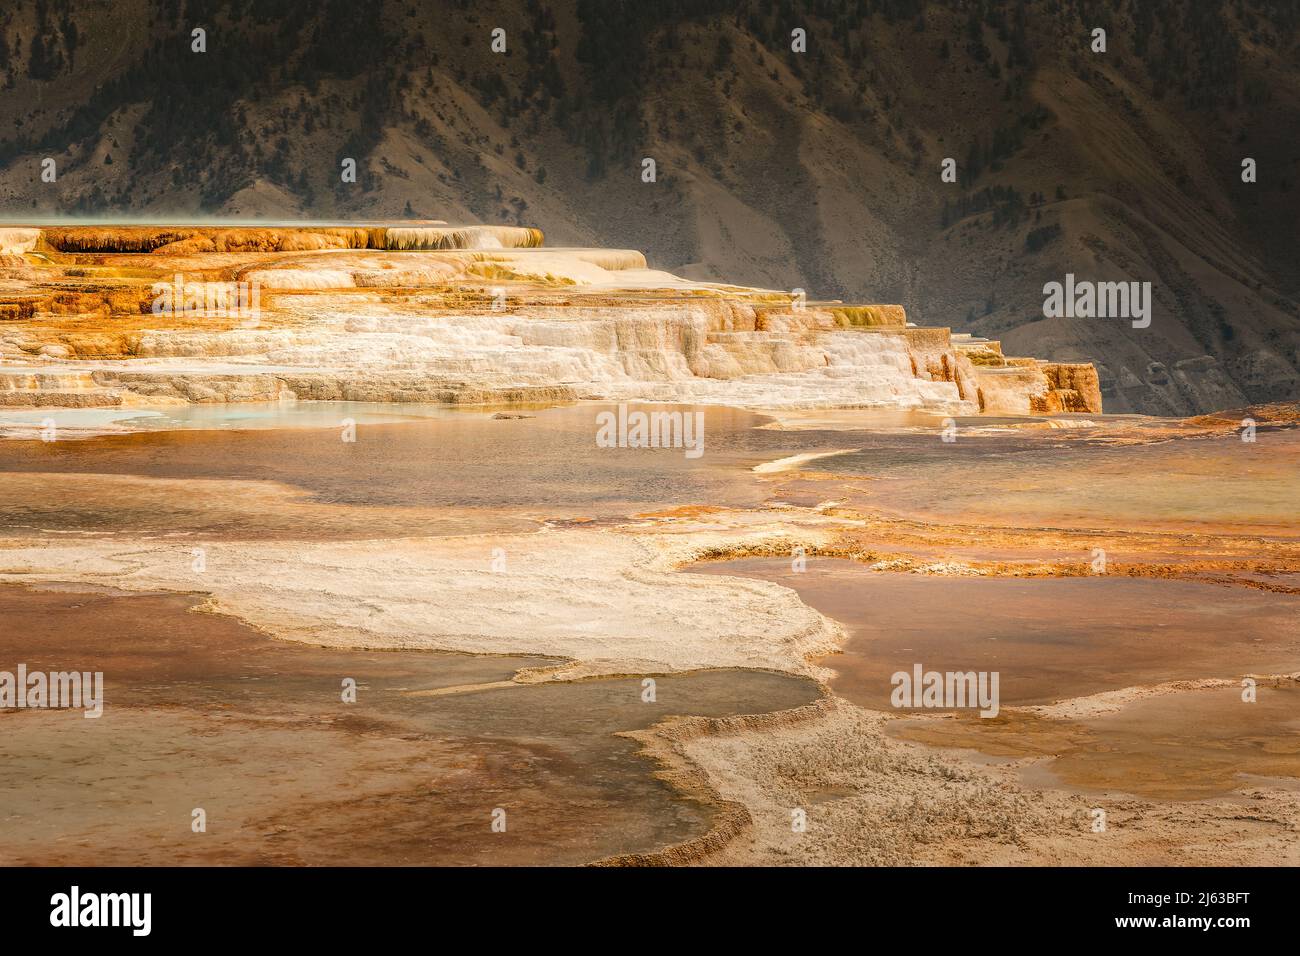 Le terrazze di Mammoth Hot Springs, Yellowstone National Park, Wyoming Foto Stock